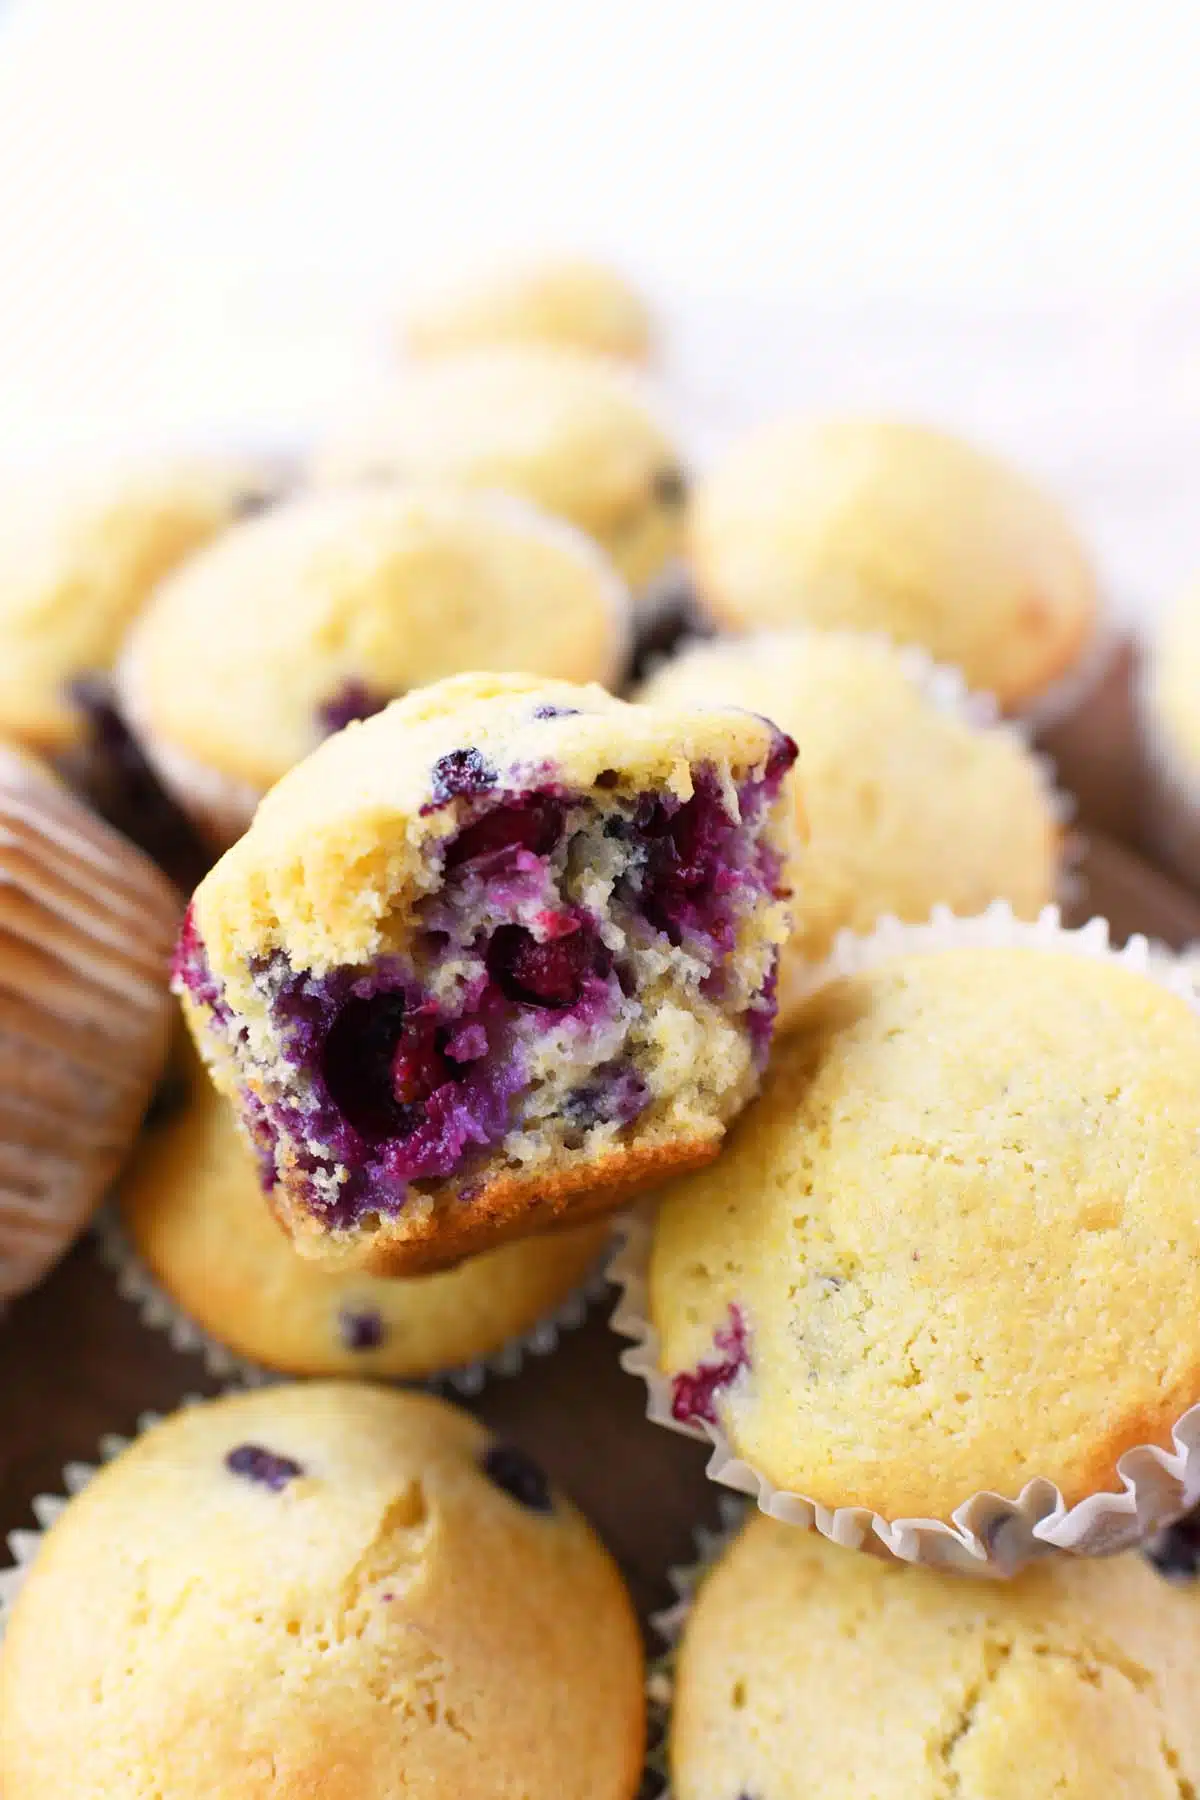 Inside of a fluffy, blueberry-filled corn muffin.